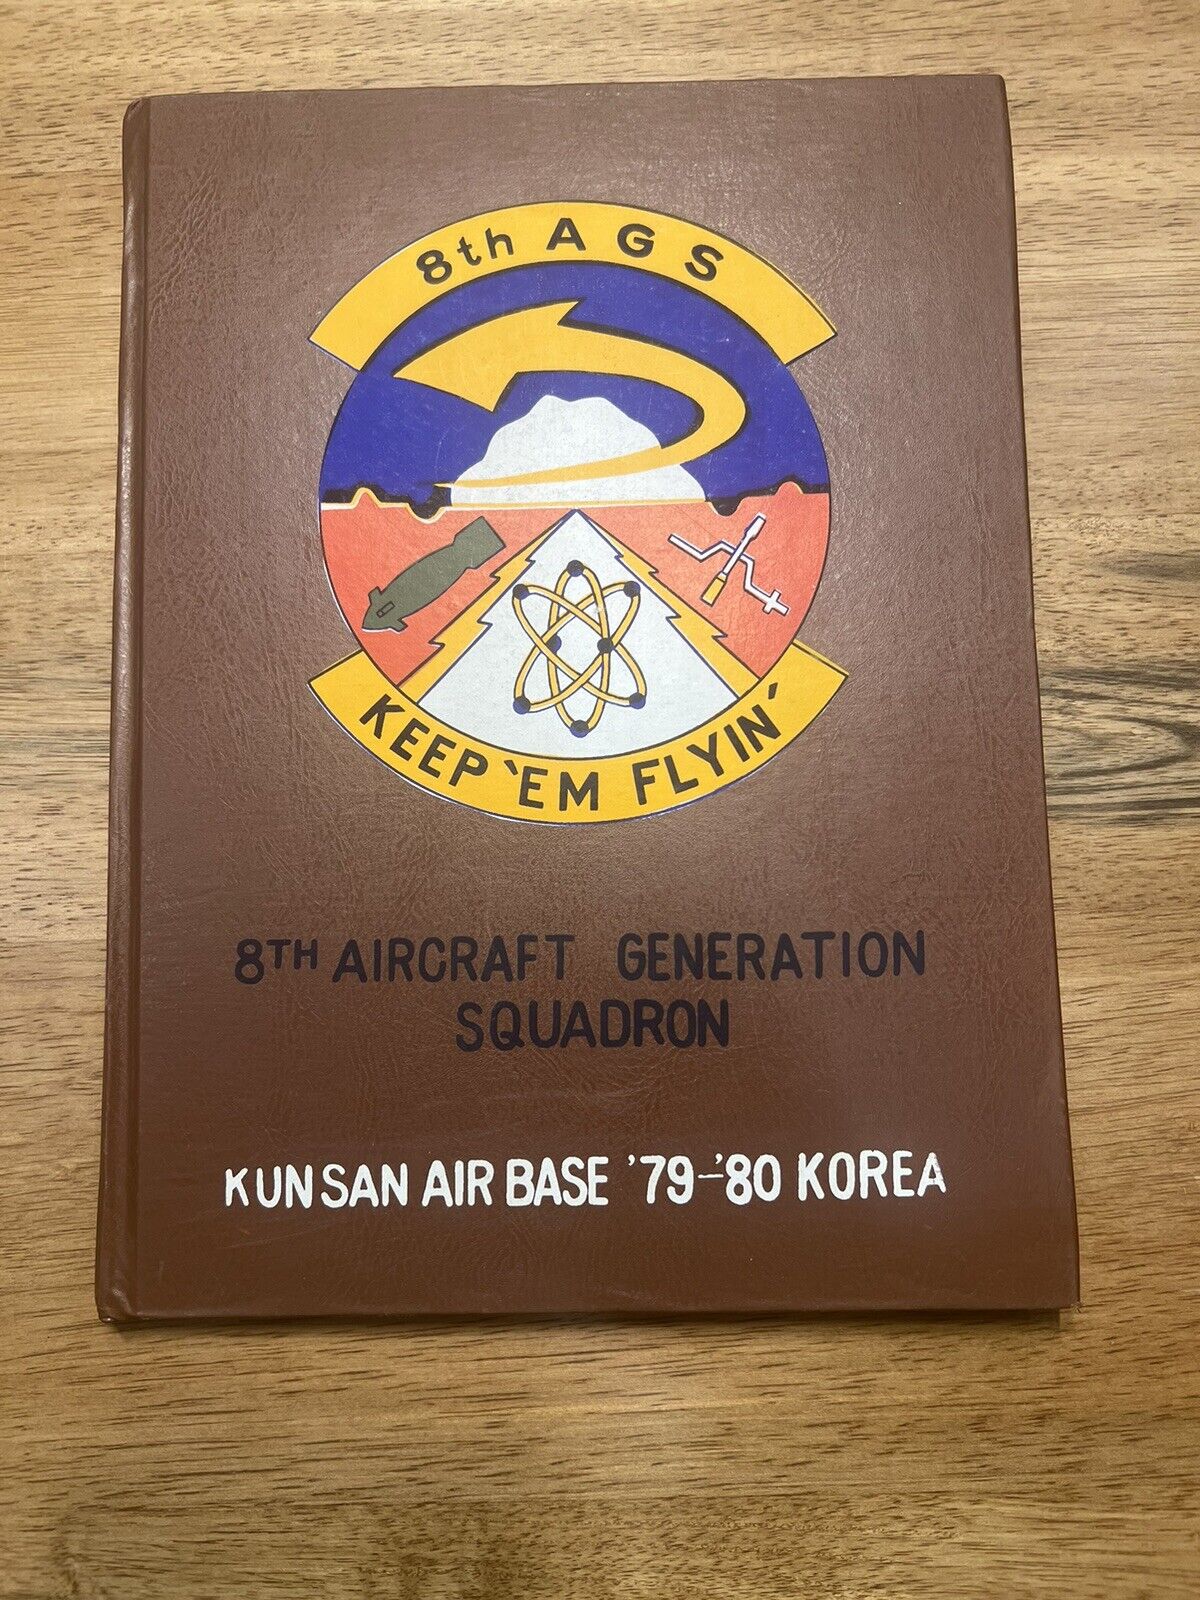 Kunsan Air Base 1979-80 Korea Yearbook 8th AGS 8th Aircraft Generation Squadron